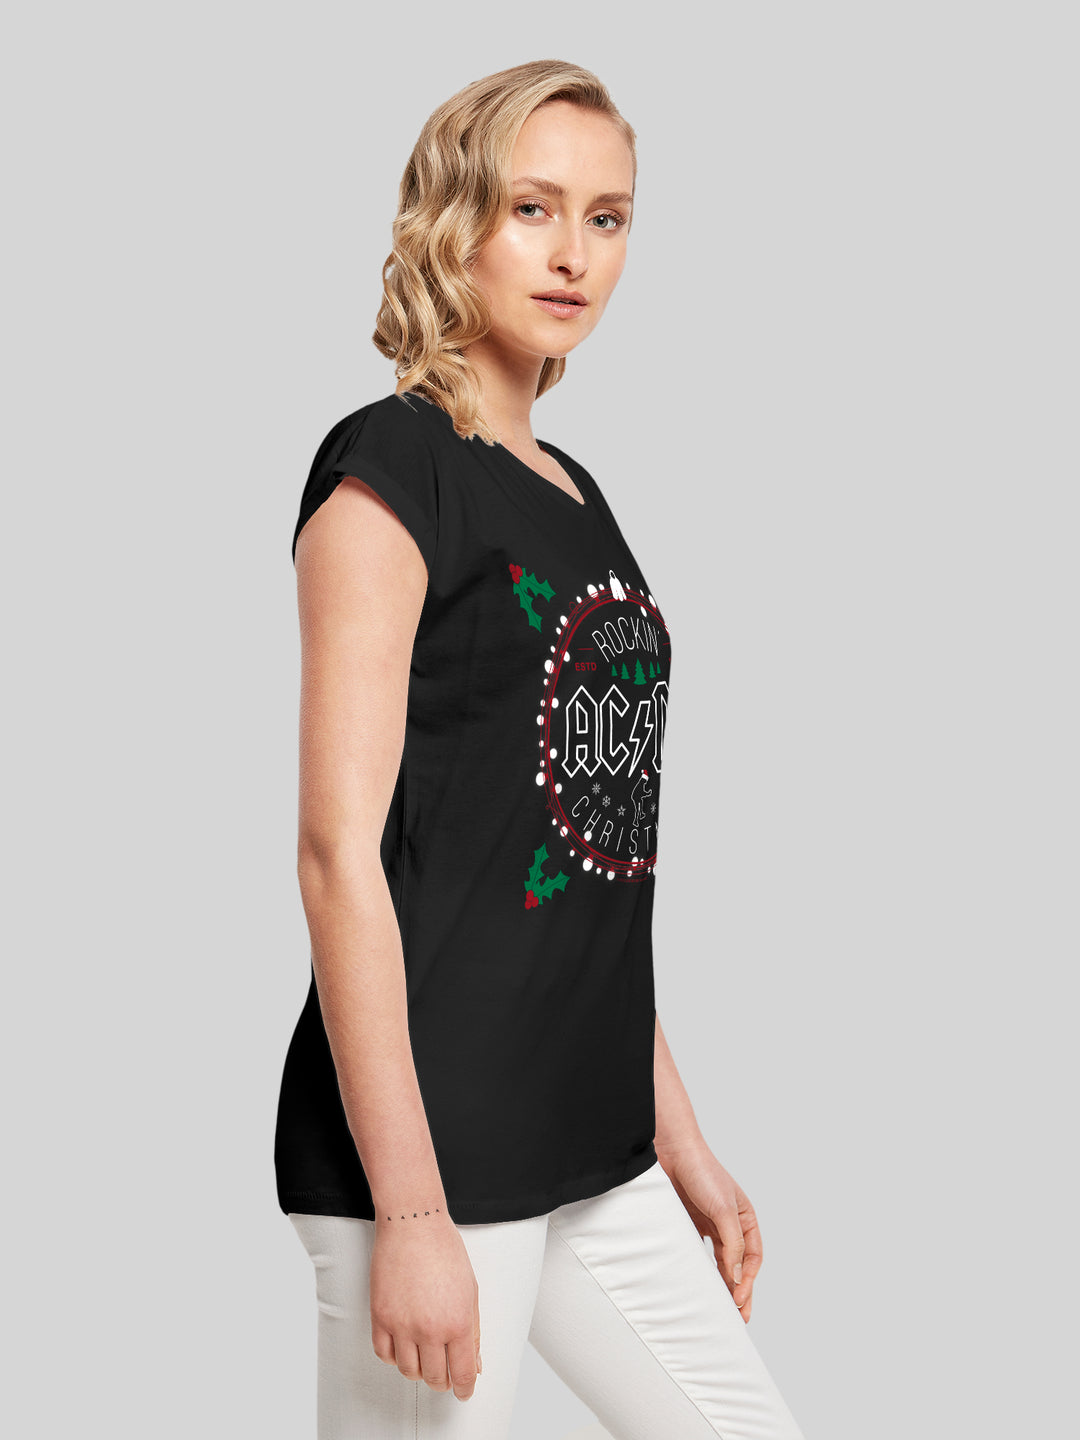 ACDC-Christmas-Circle and ACDC neck print with Ladies Extended Shoulder Tee